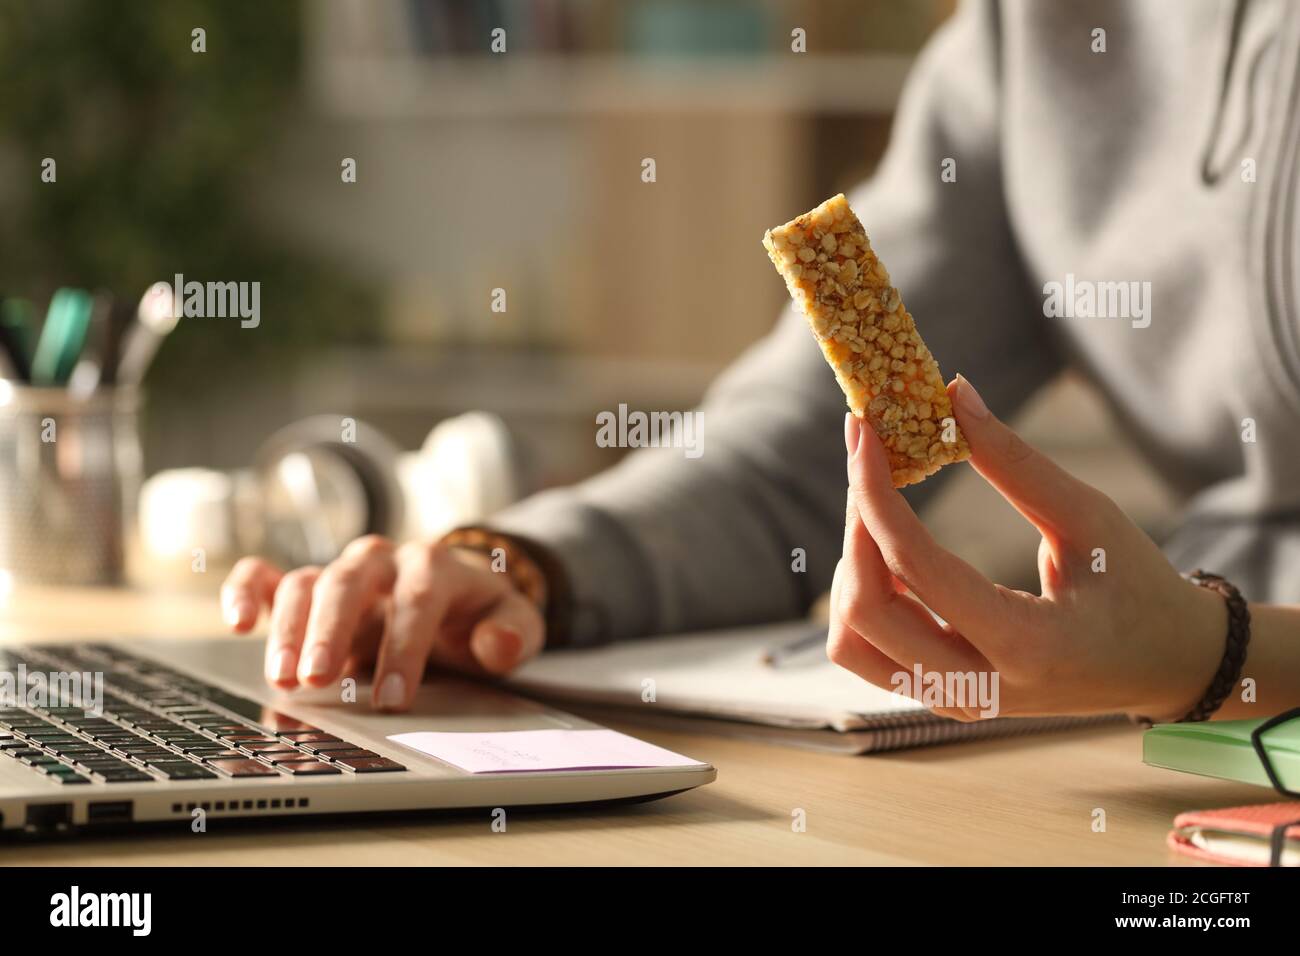 Close up of student girl hands holding snack bar at night elearning on laptop Stock Photo